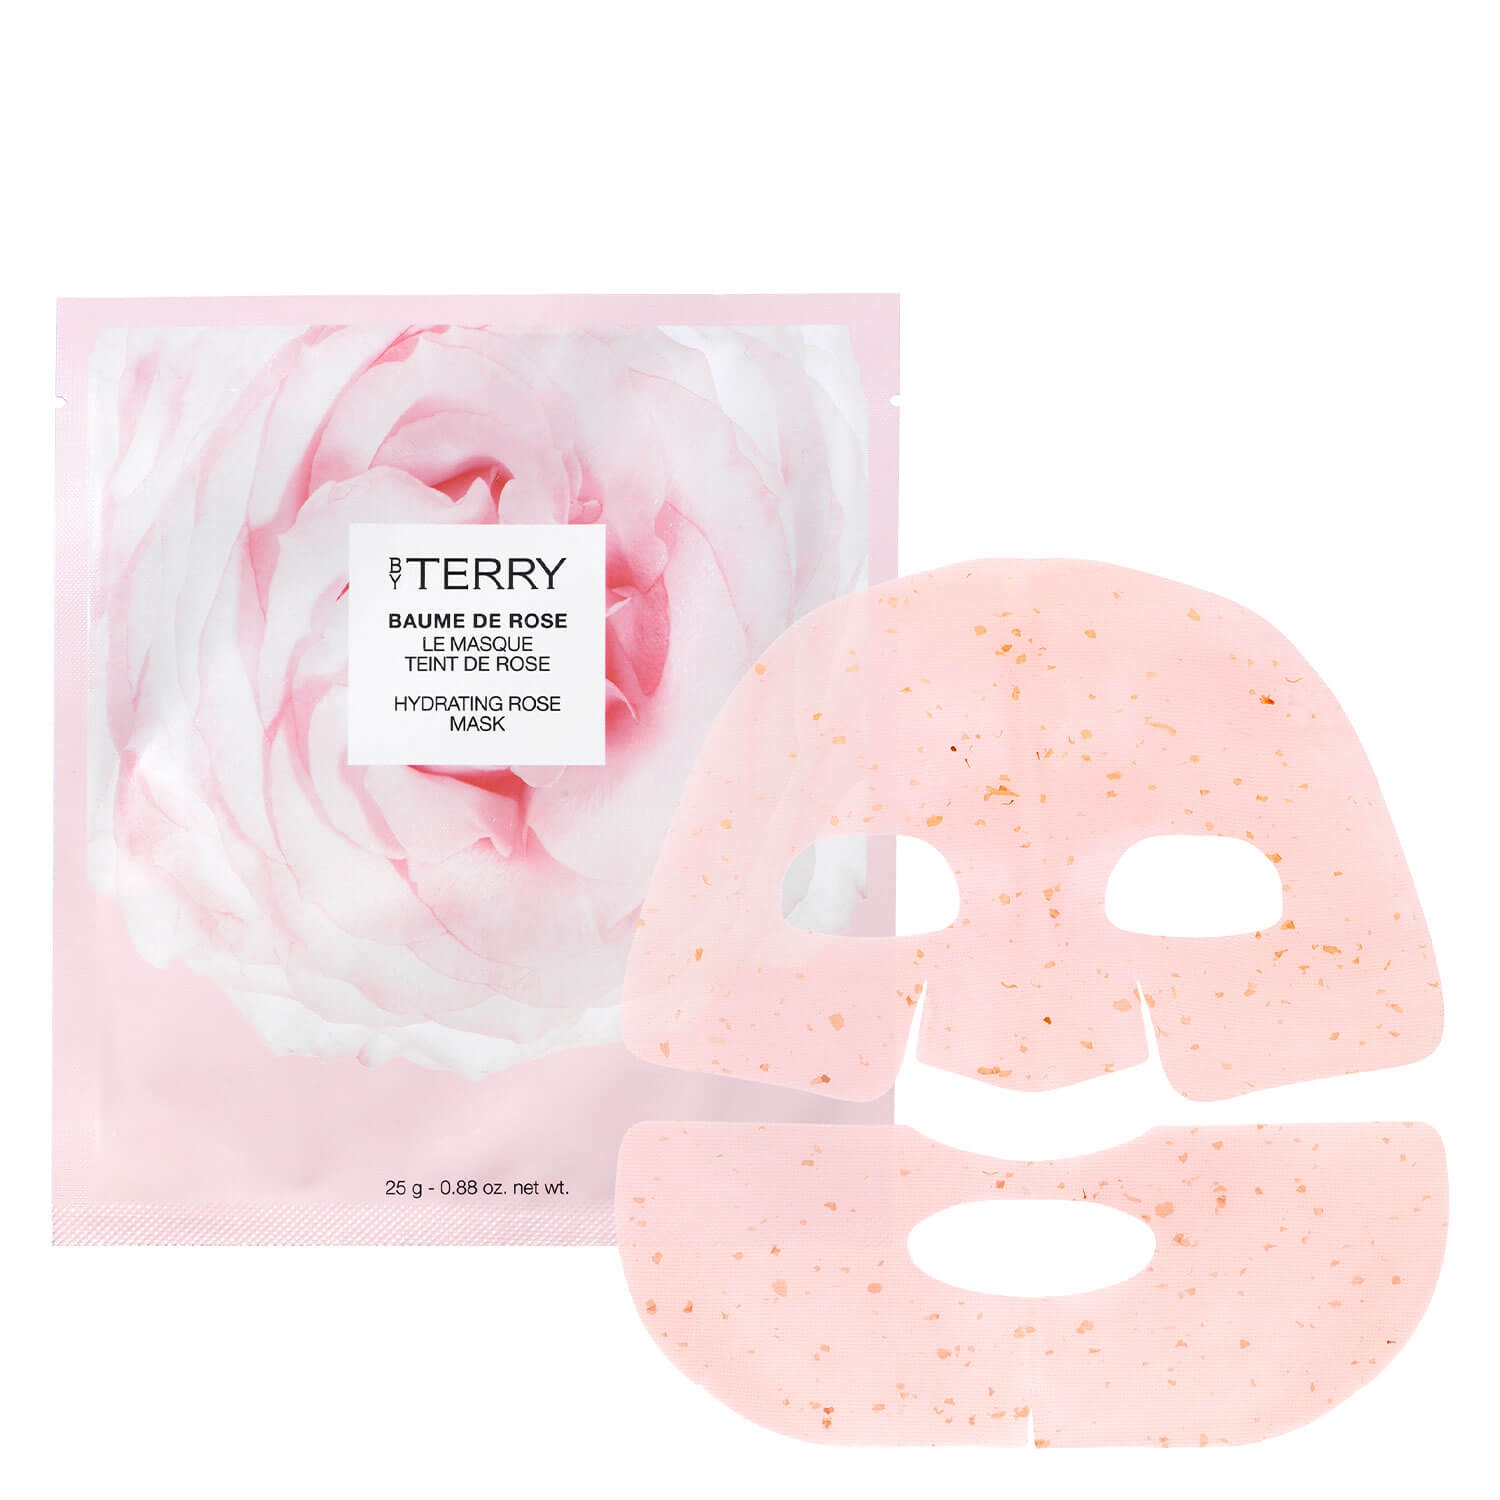 Produktbild von By Terry Care - Baume de Rose Hydrating Sheet Mask